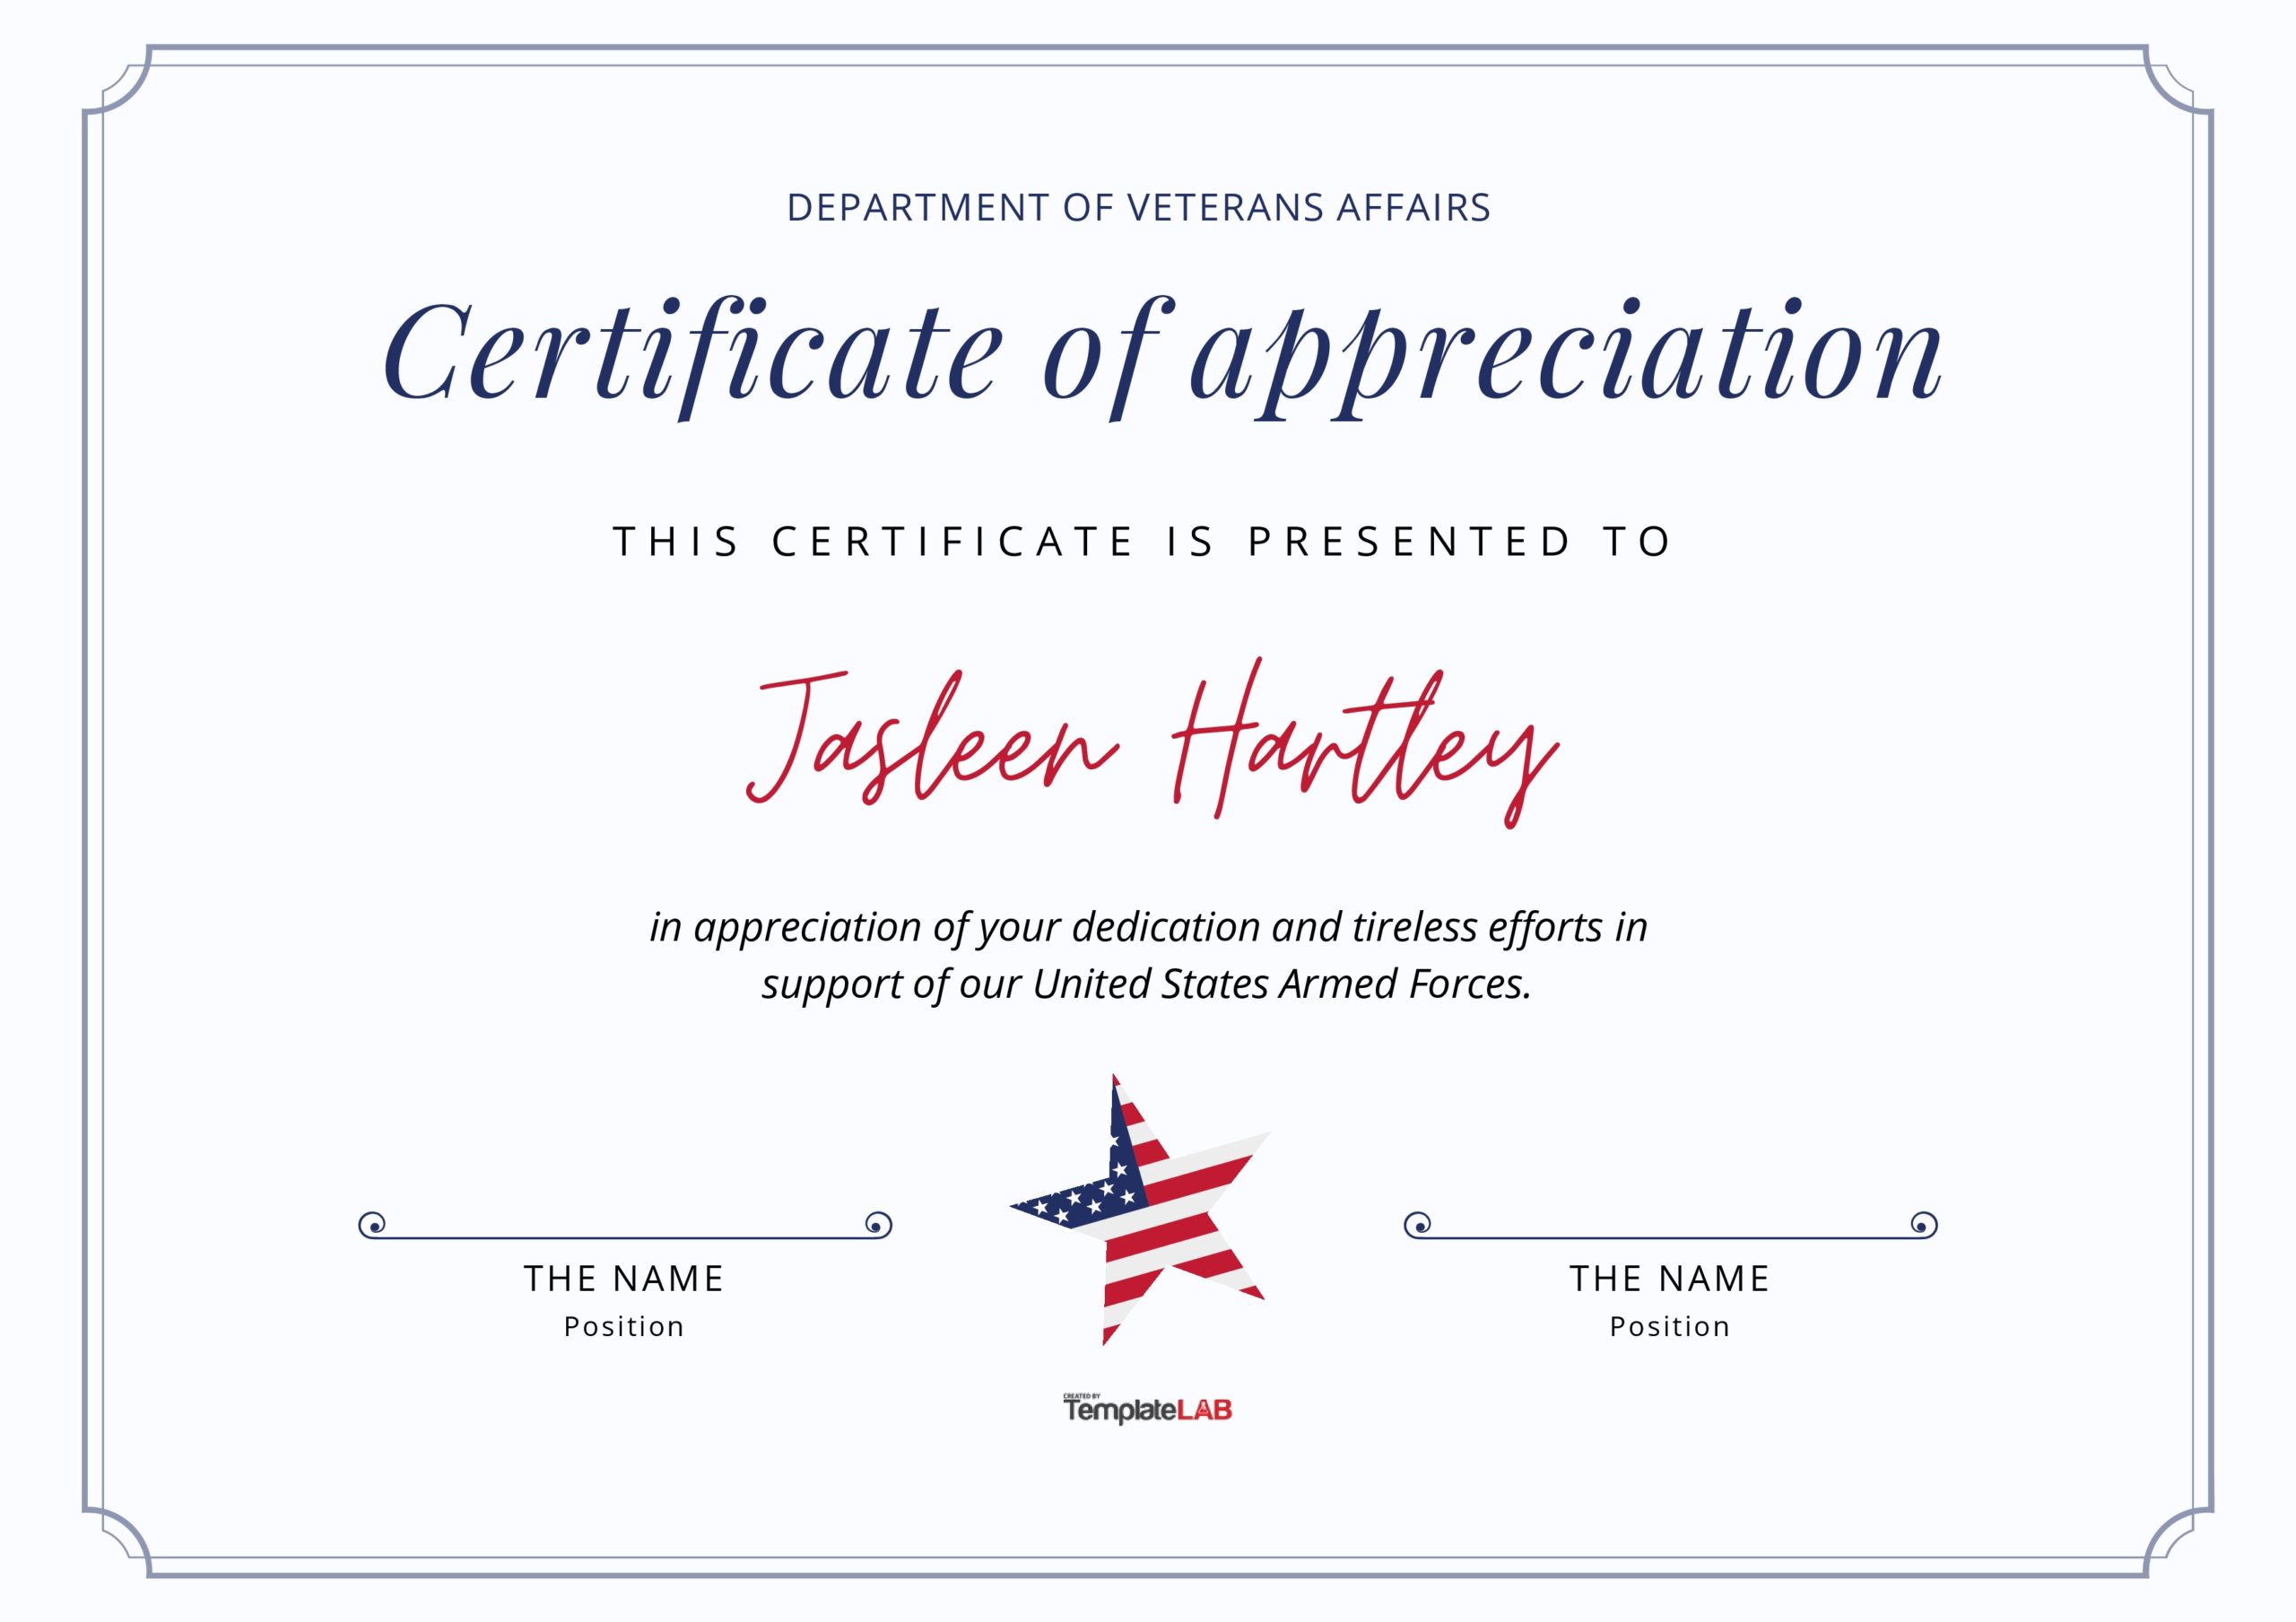 26 Free Certificate of Appreciation Templates and Letters